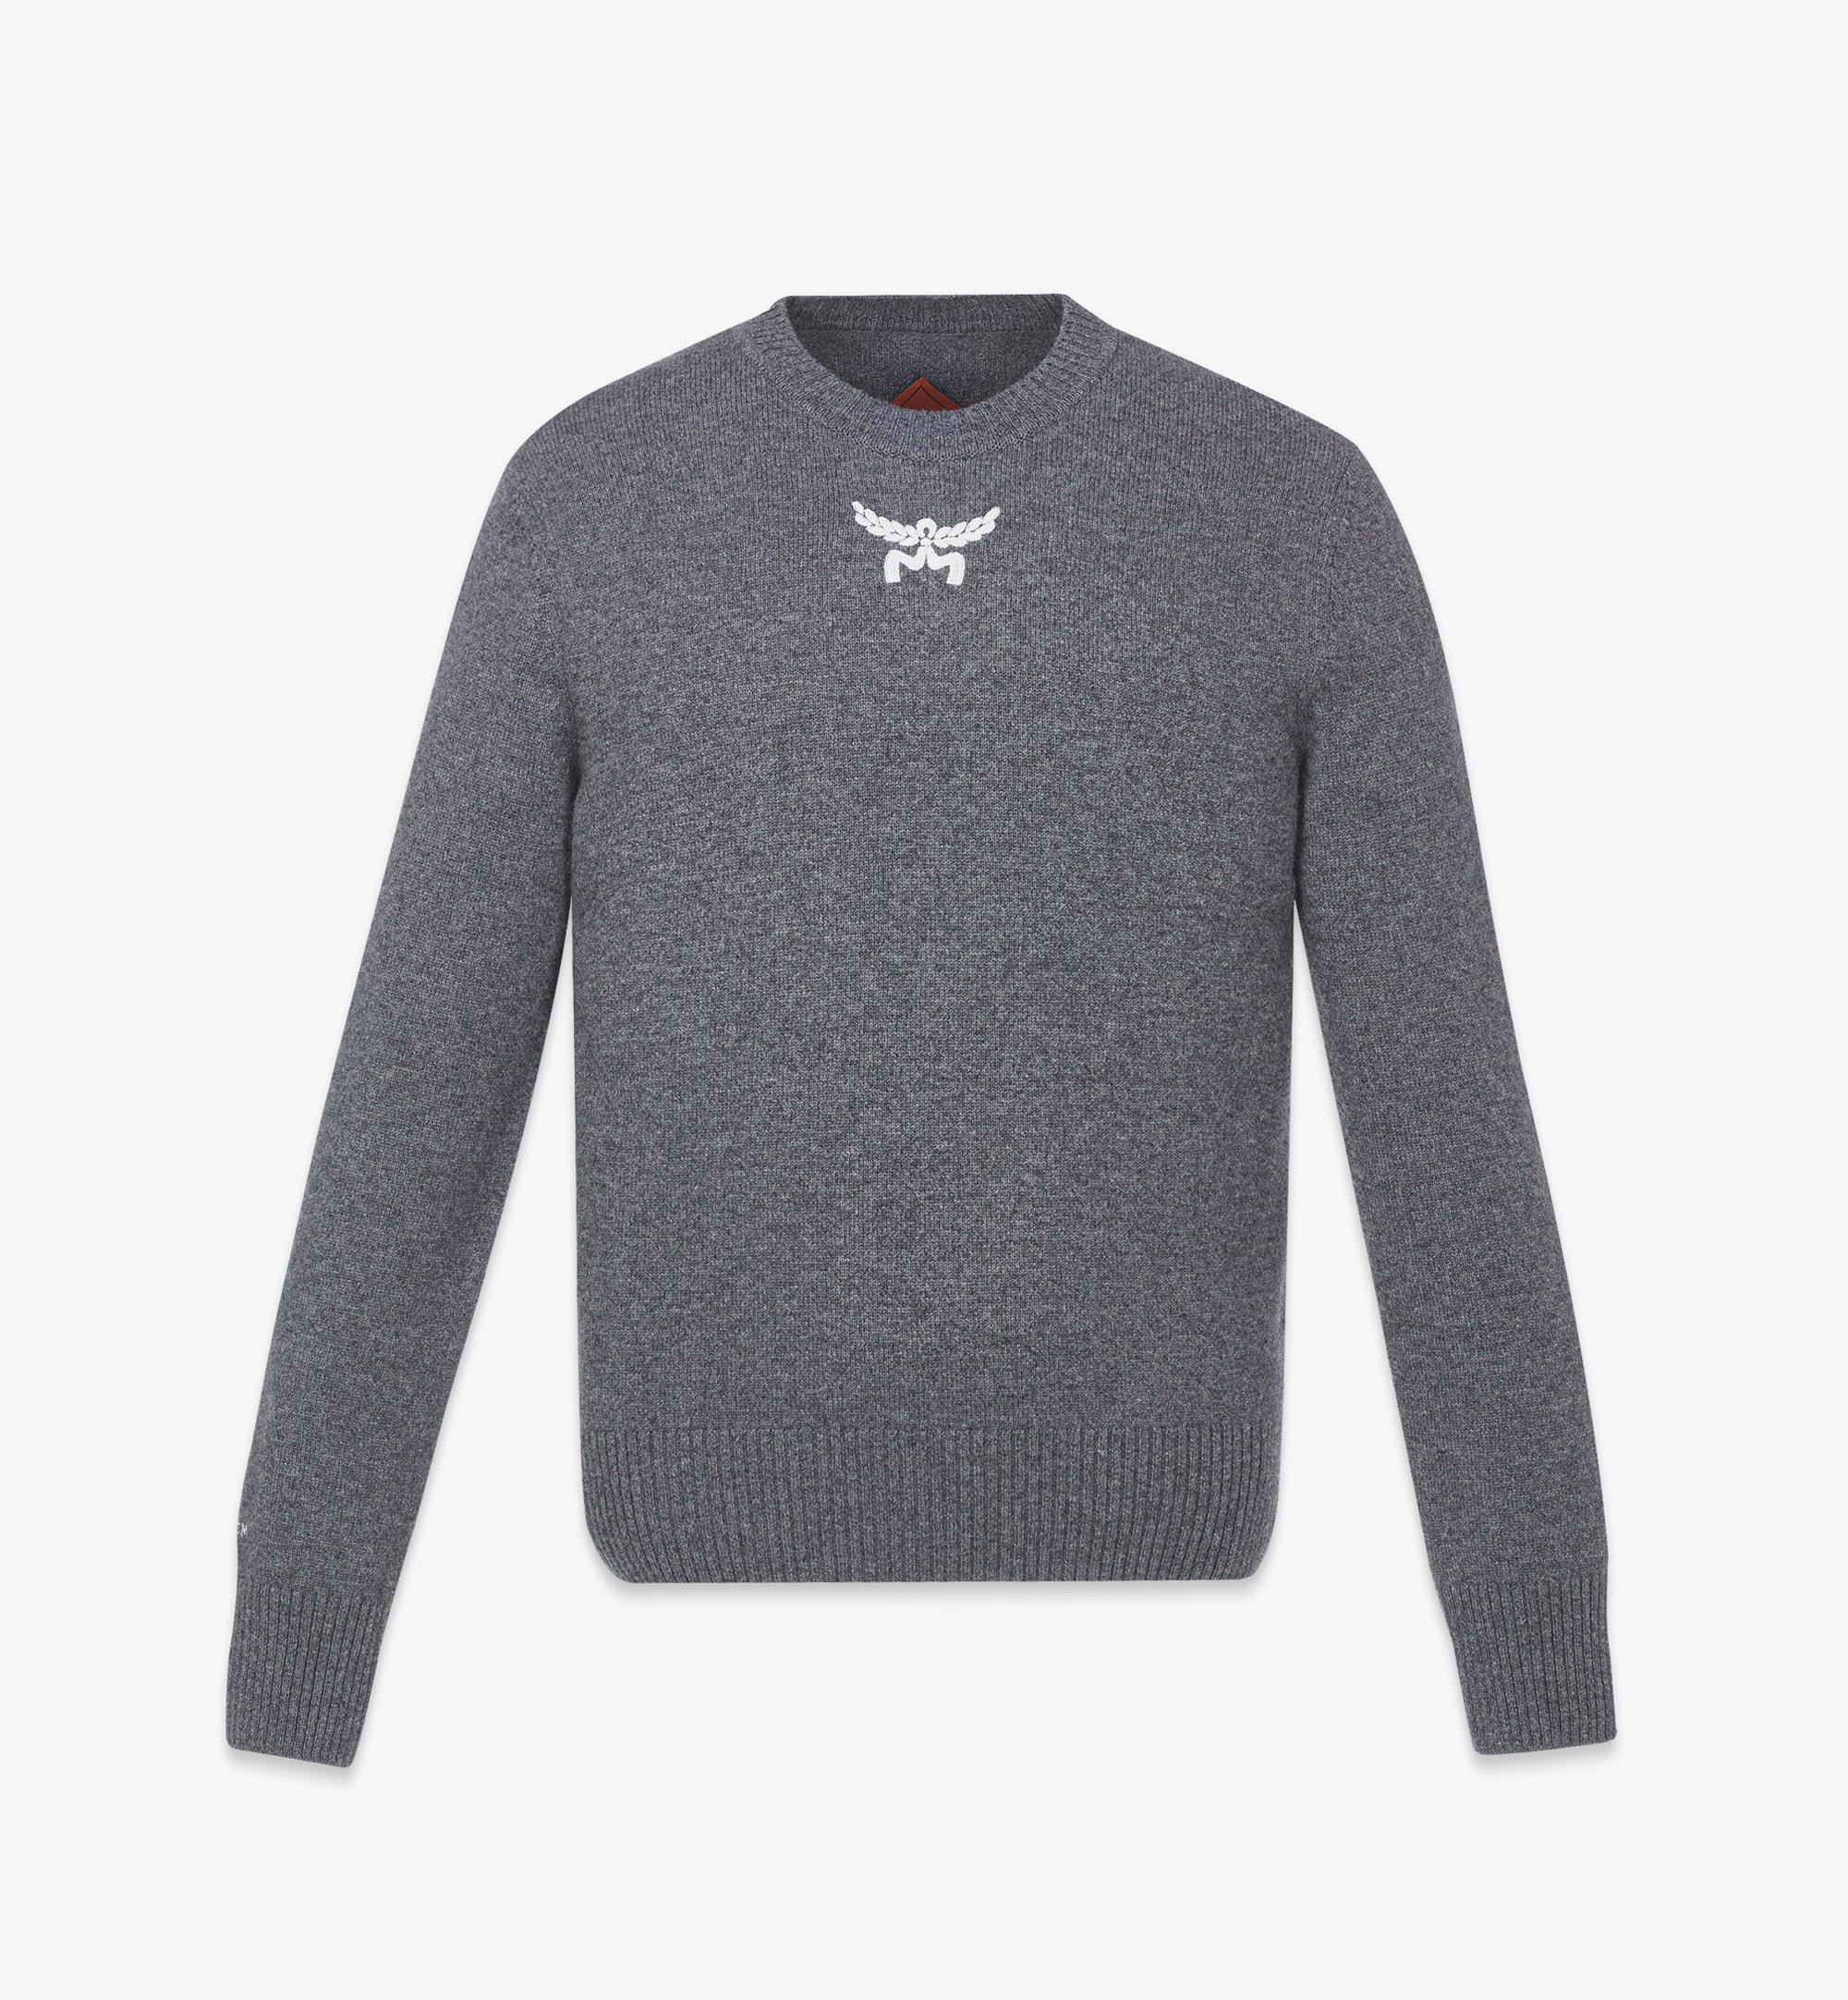 MCM Laurel Sweater in Wool and Recycled Cashmere